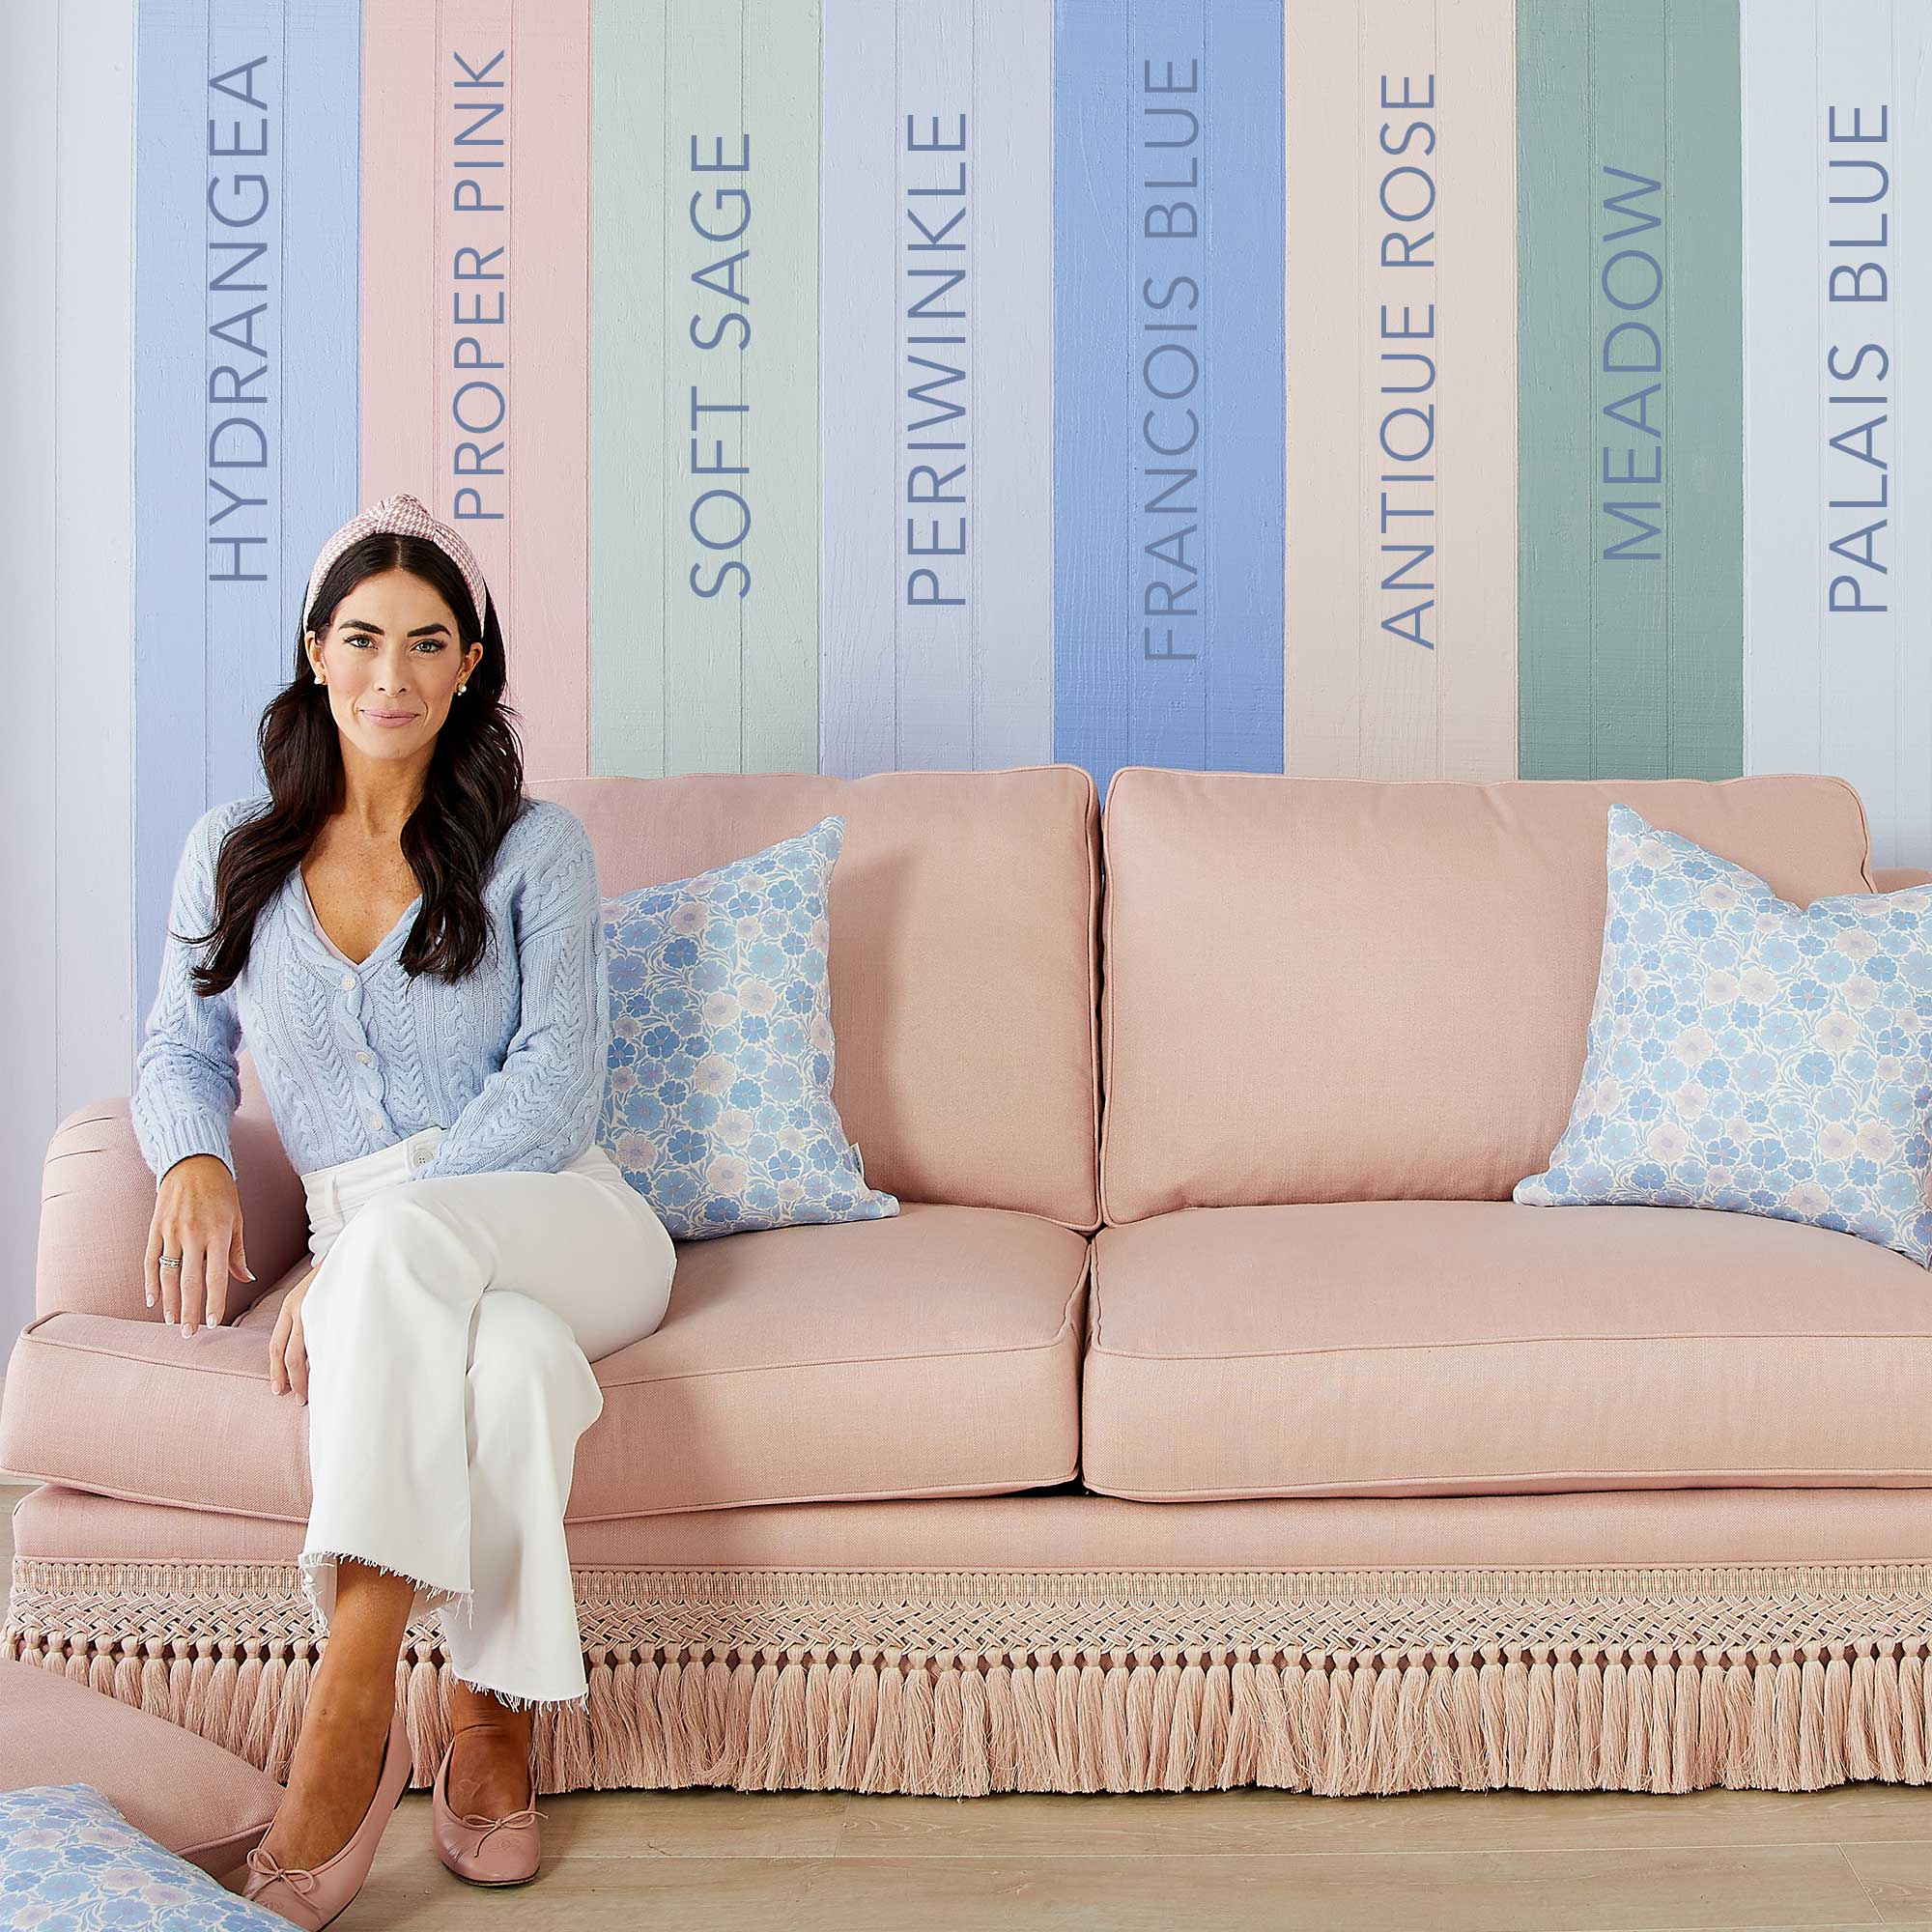 Caitlin Wilson on Sofa with Paint Color Swatches on Wall